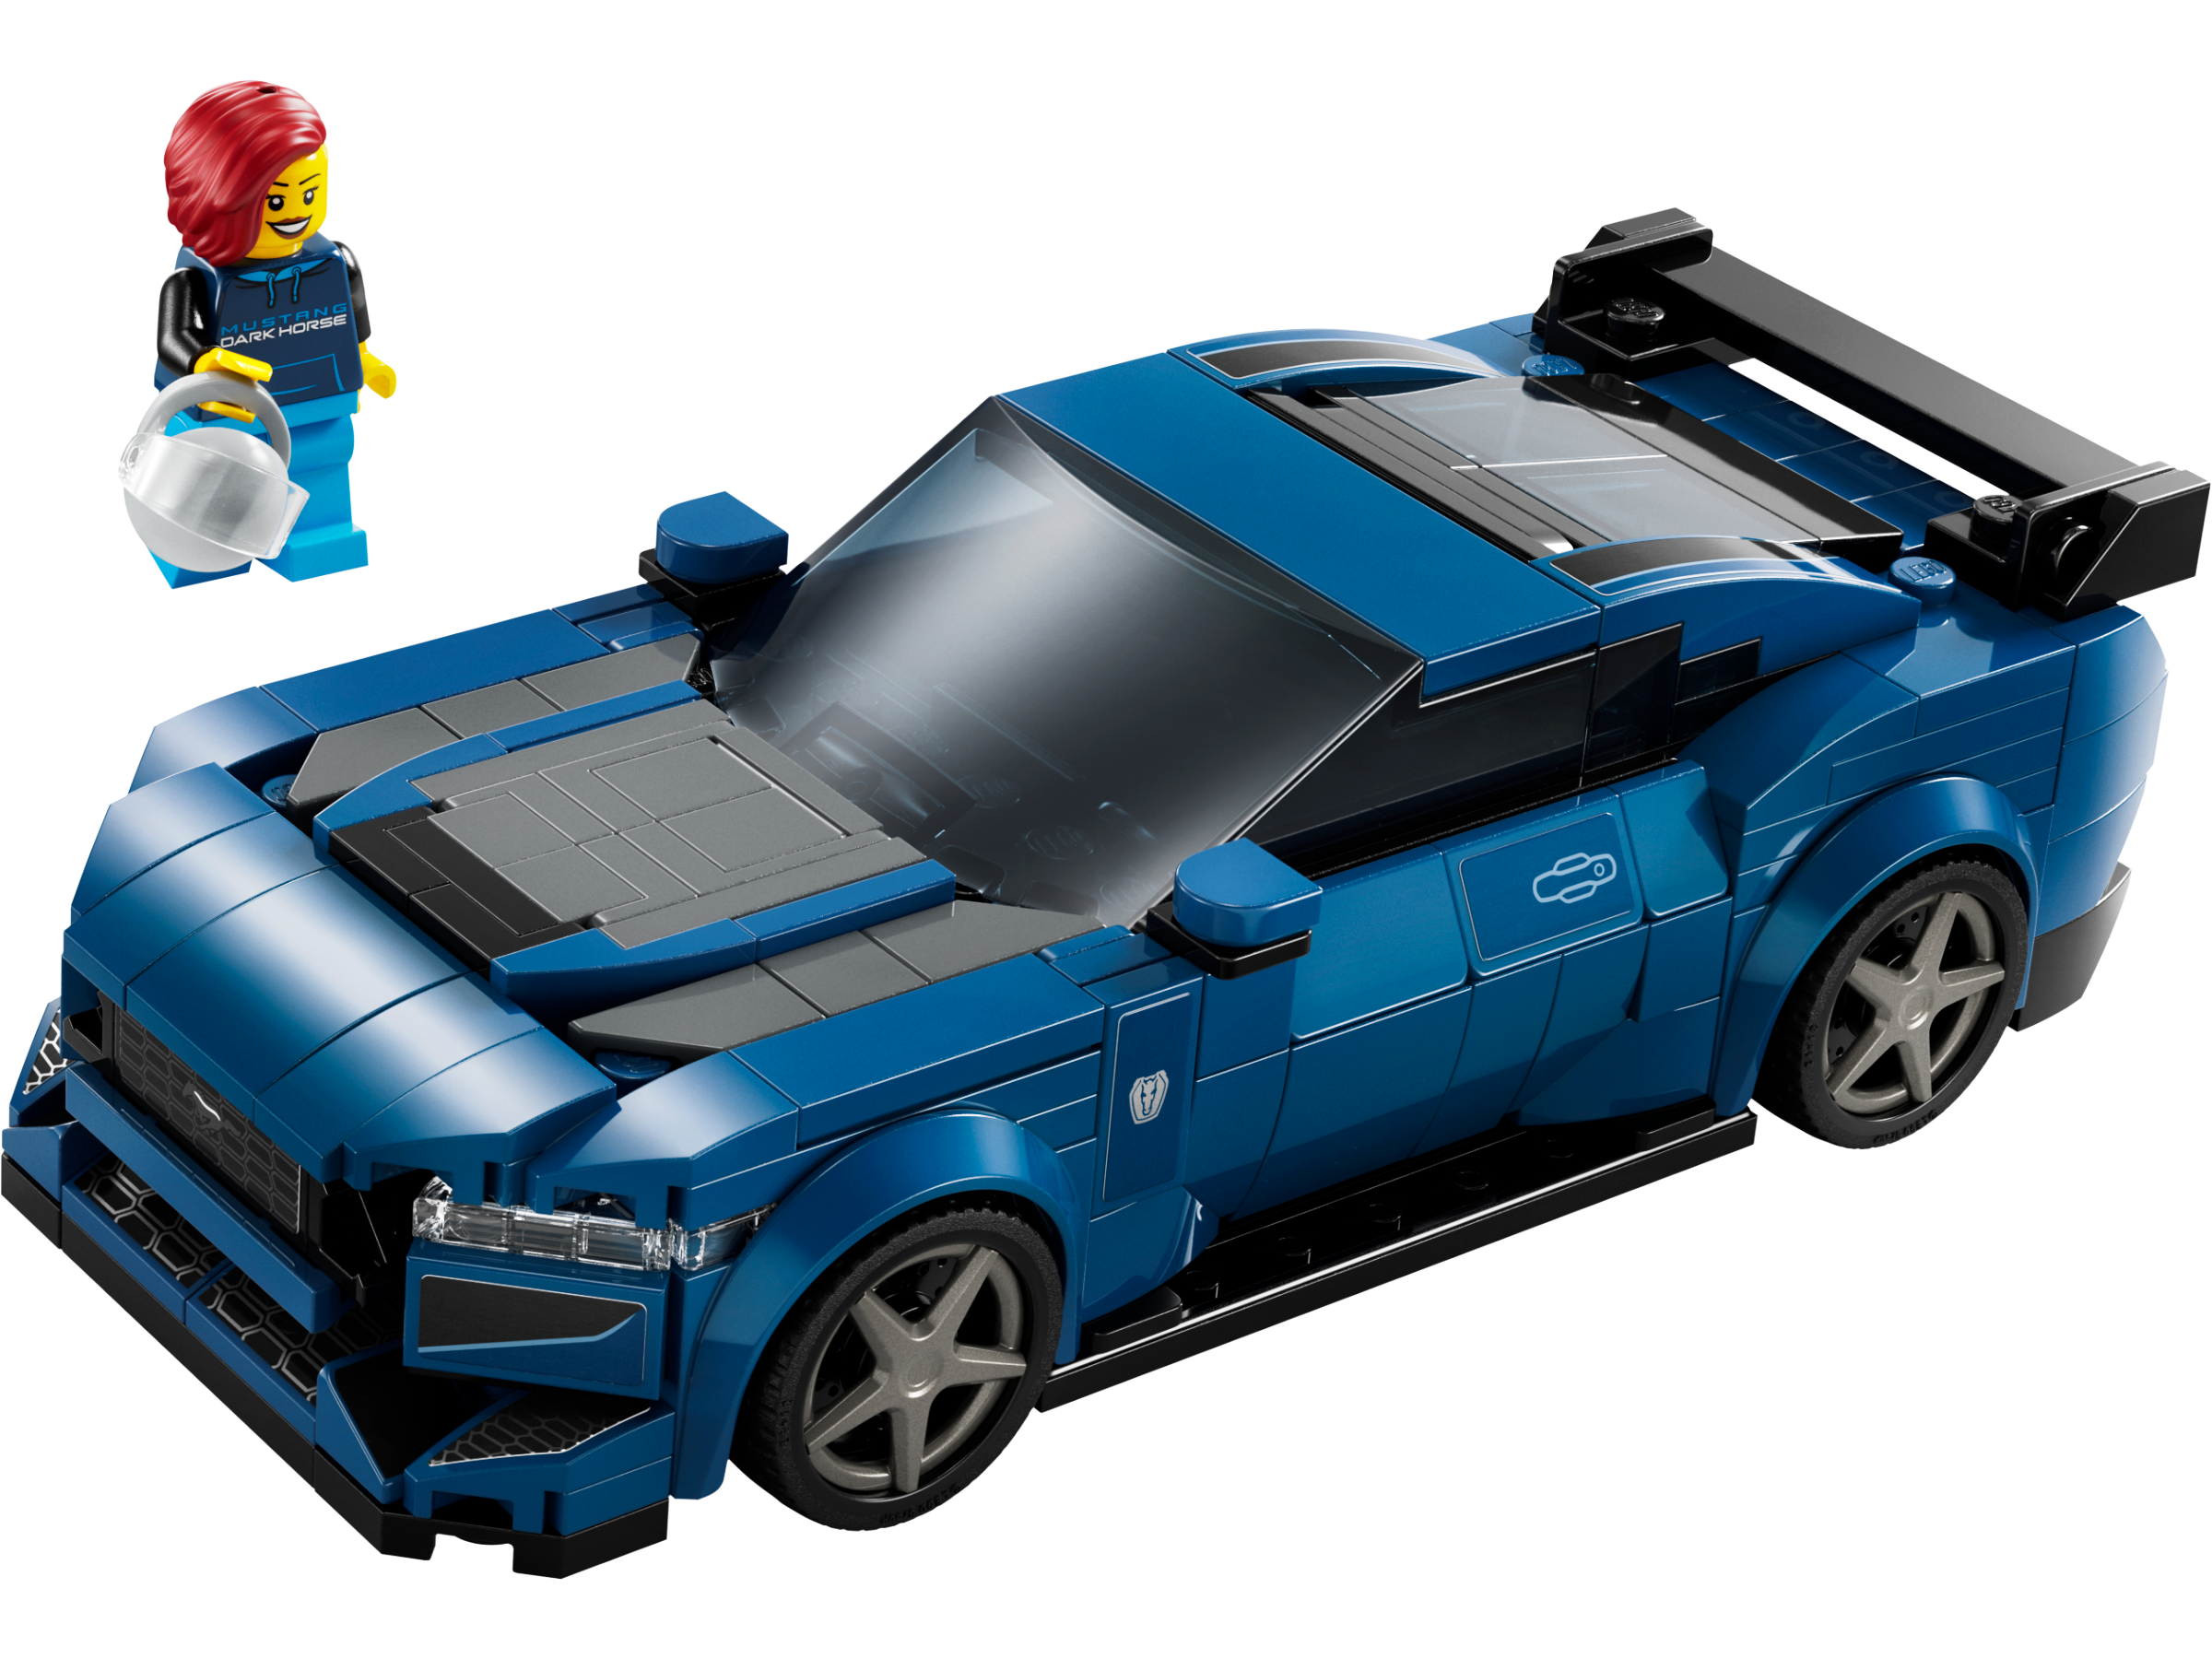 LEGO Creator Expert Ford Mustang Model Release